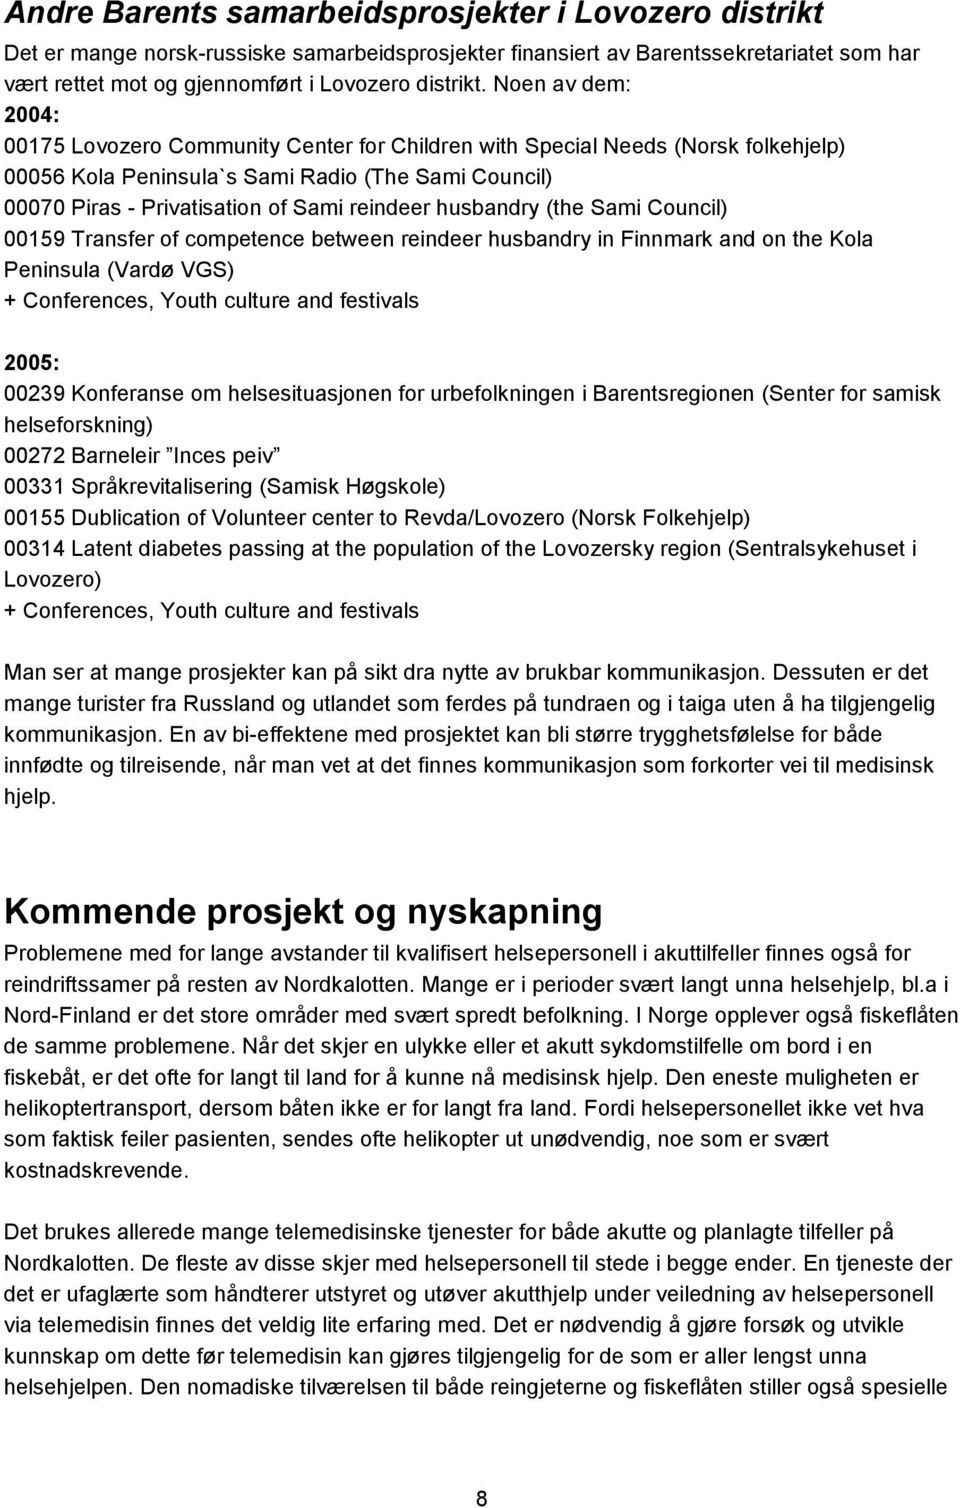 husbandry (the Sami Council) 00159 Transfer of competence between reindeer husbandry in Finnmark and on the Kola Peninsula (Vardø VGS) + Conferences, Youth culture and festivals 2005: 00239